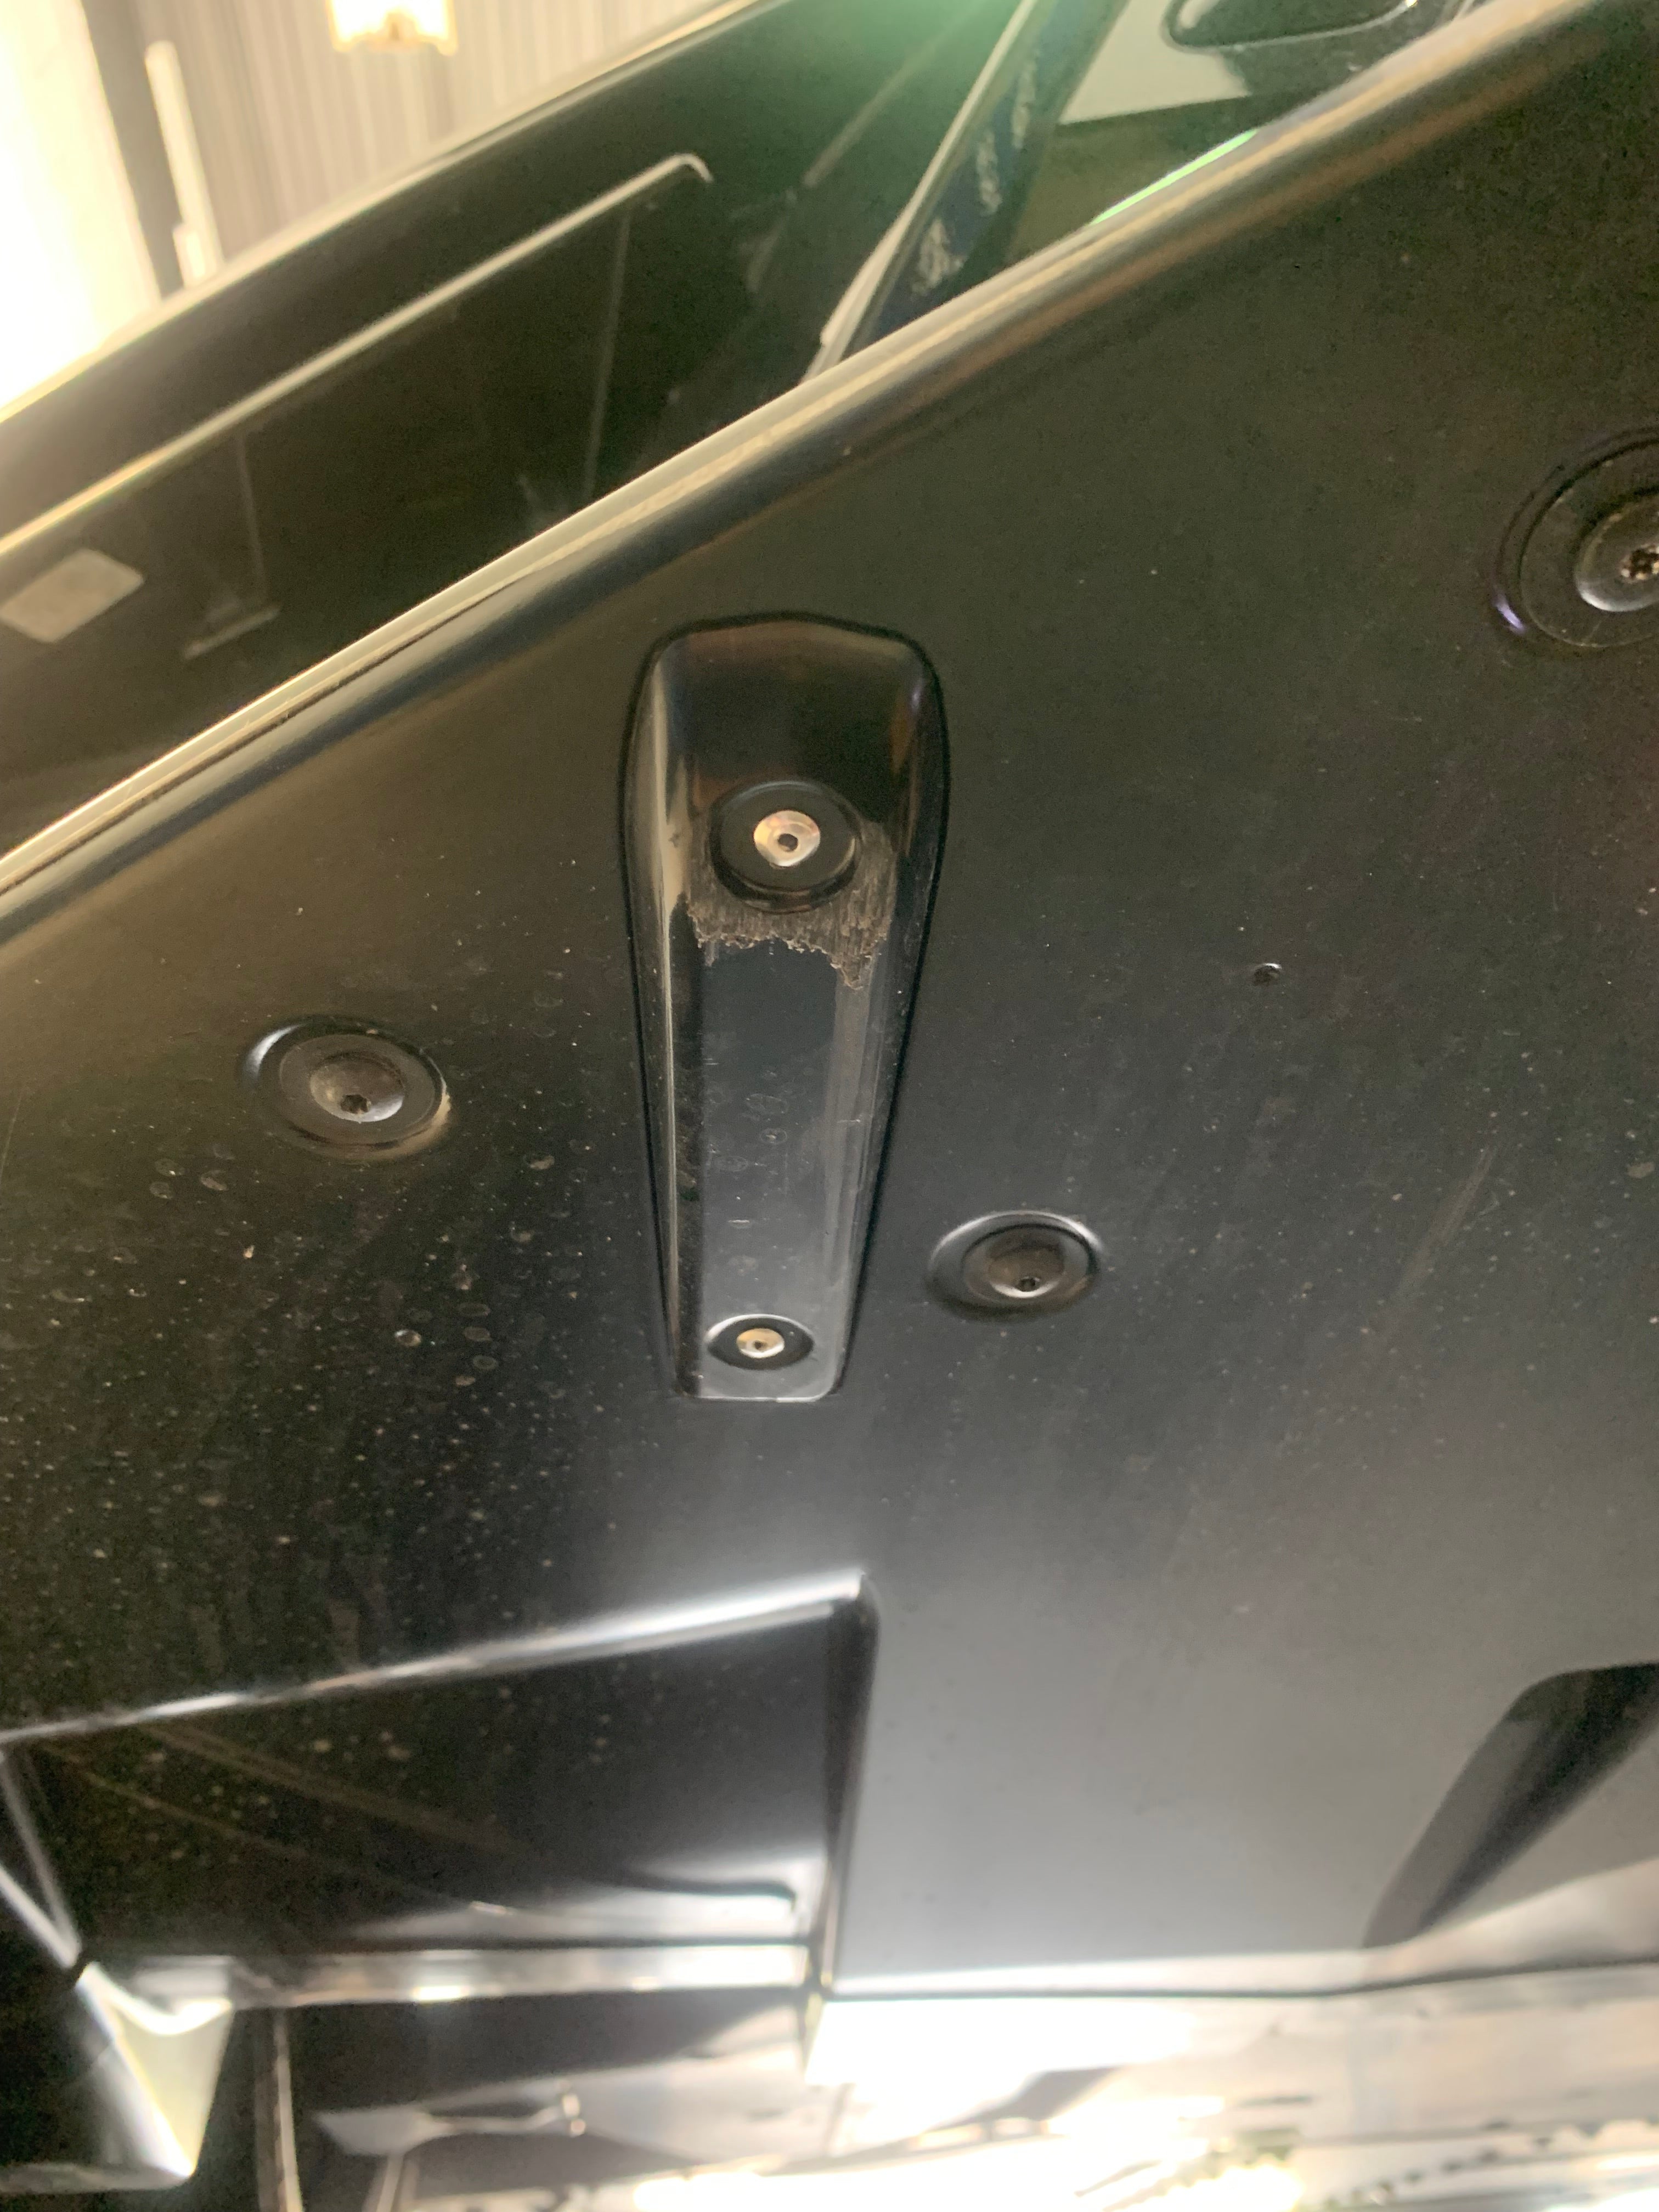 close-up of the ACS C8 Undertray Scrape Guard showing signs of wear